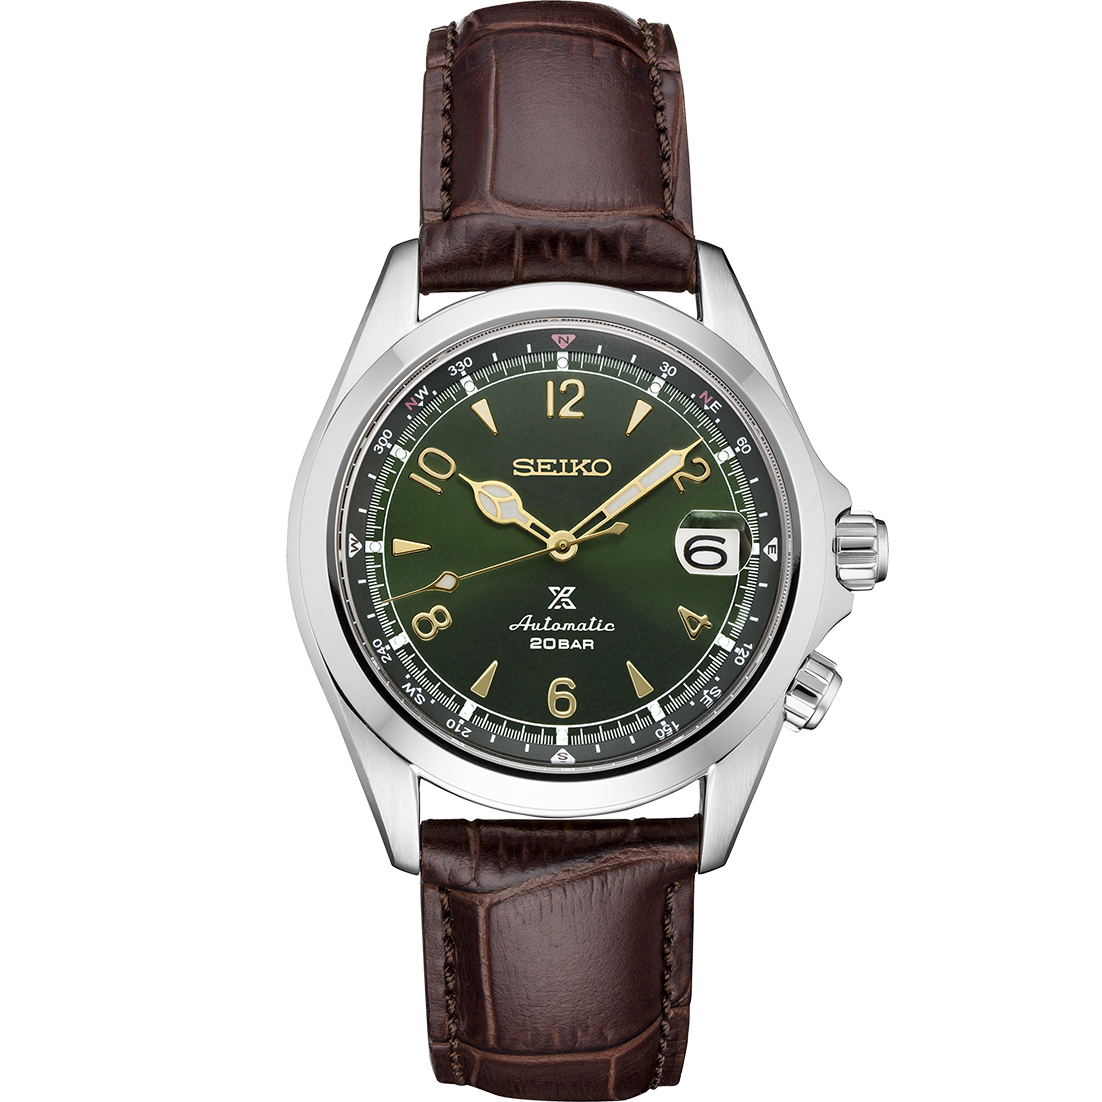 Seiko Prospex Alpinist Stainless Steel Automatic Watch
Brown Calfskin Strap
Clasp: Three-Fold Clasp With Push Button Release
Dial Color: Green
Sapphire Crystal With Anti-Reflective Coating On Inner Surface
Bezel: Smooth
MM: 39.5
Other Specification